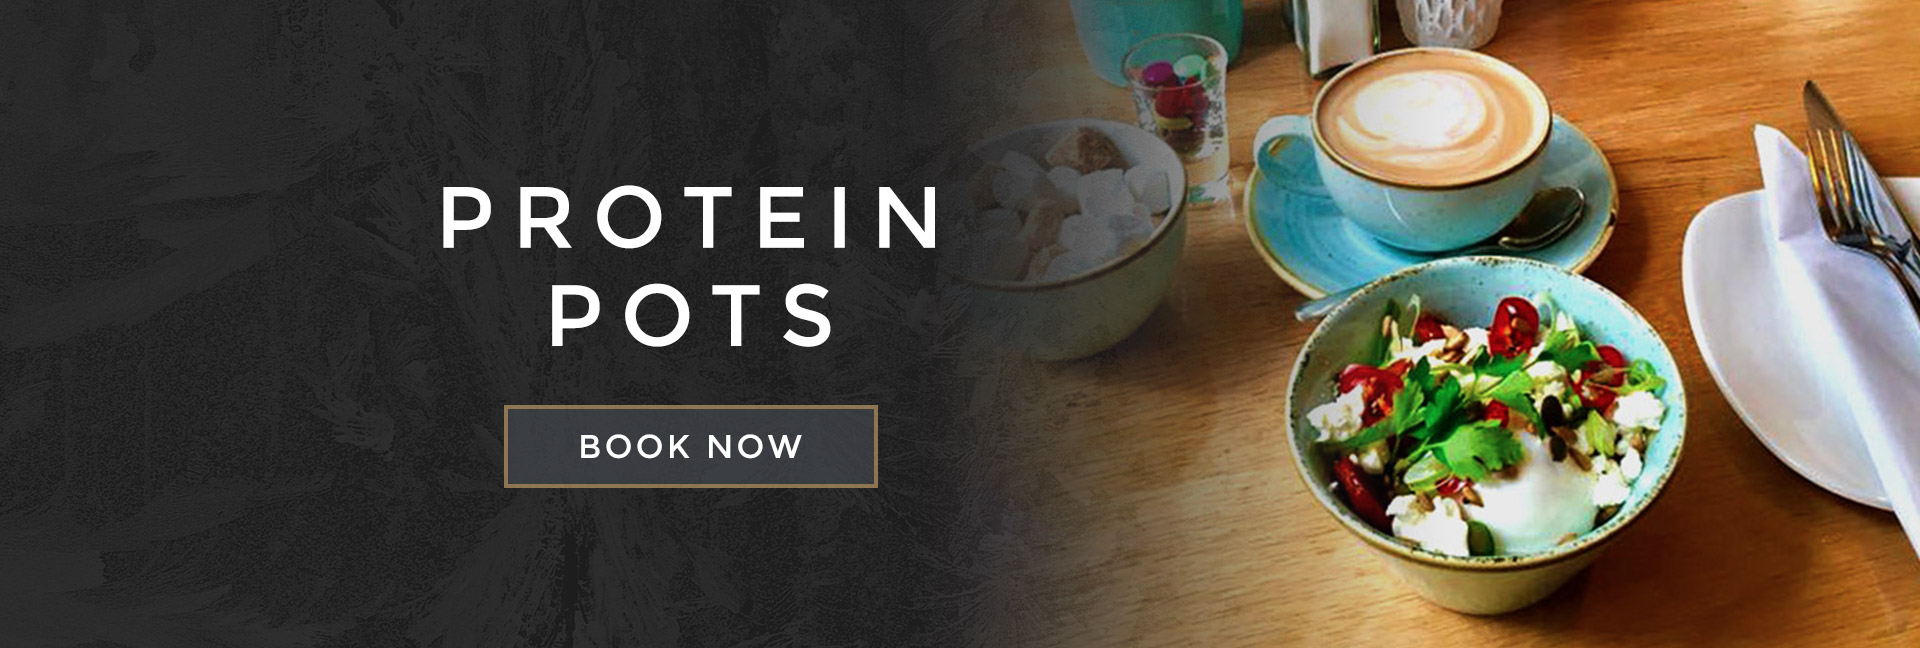 Protein pots at All Bar One Brighton - Book your table